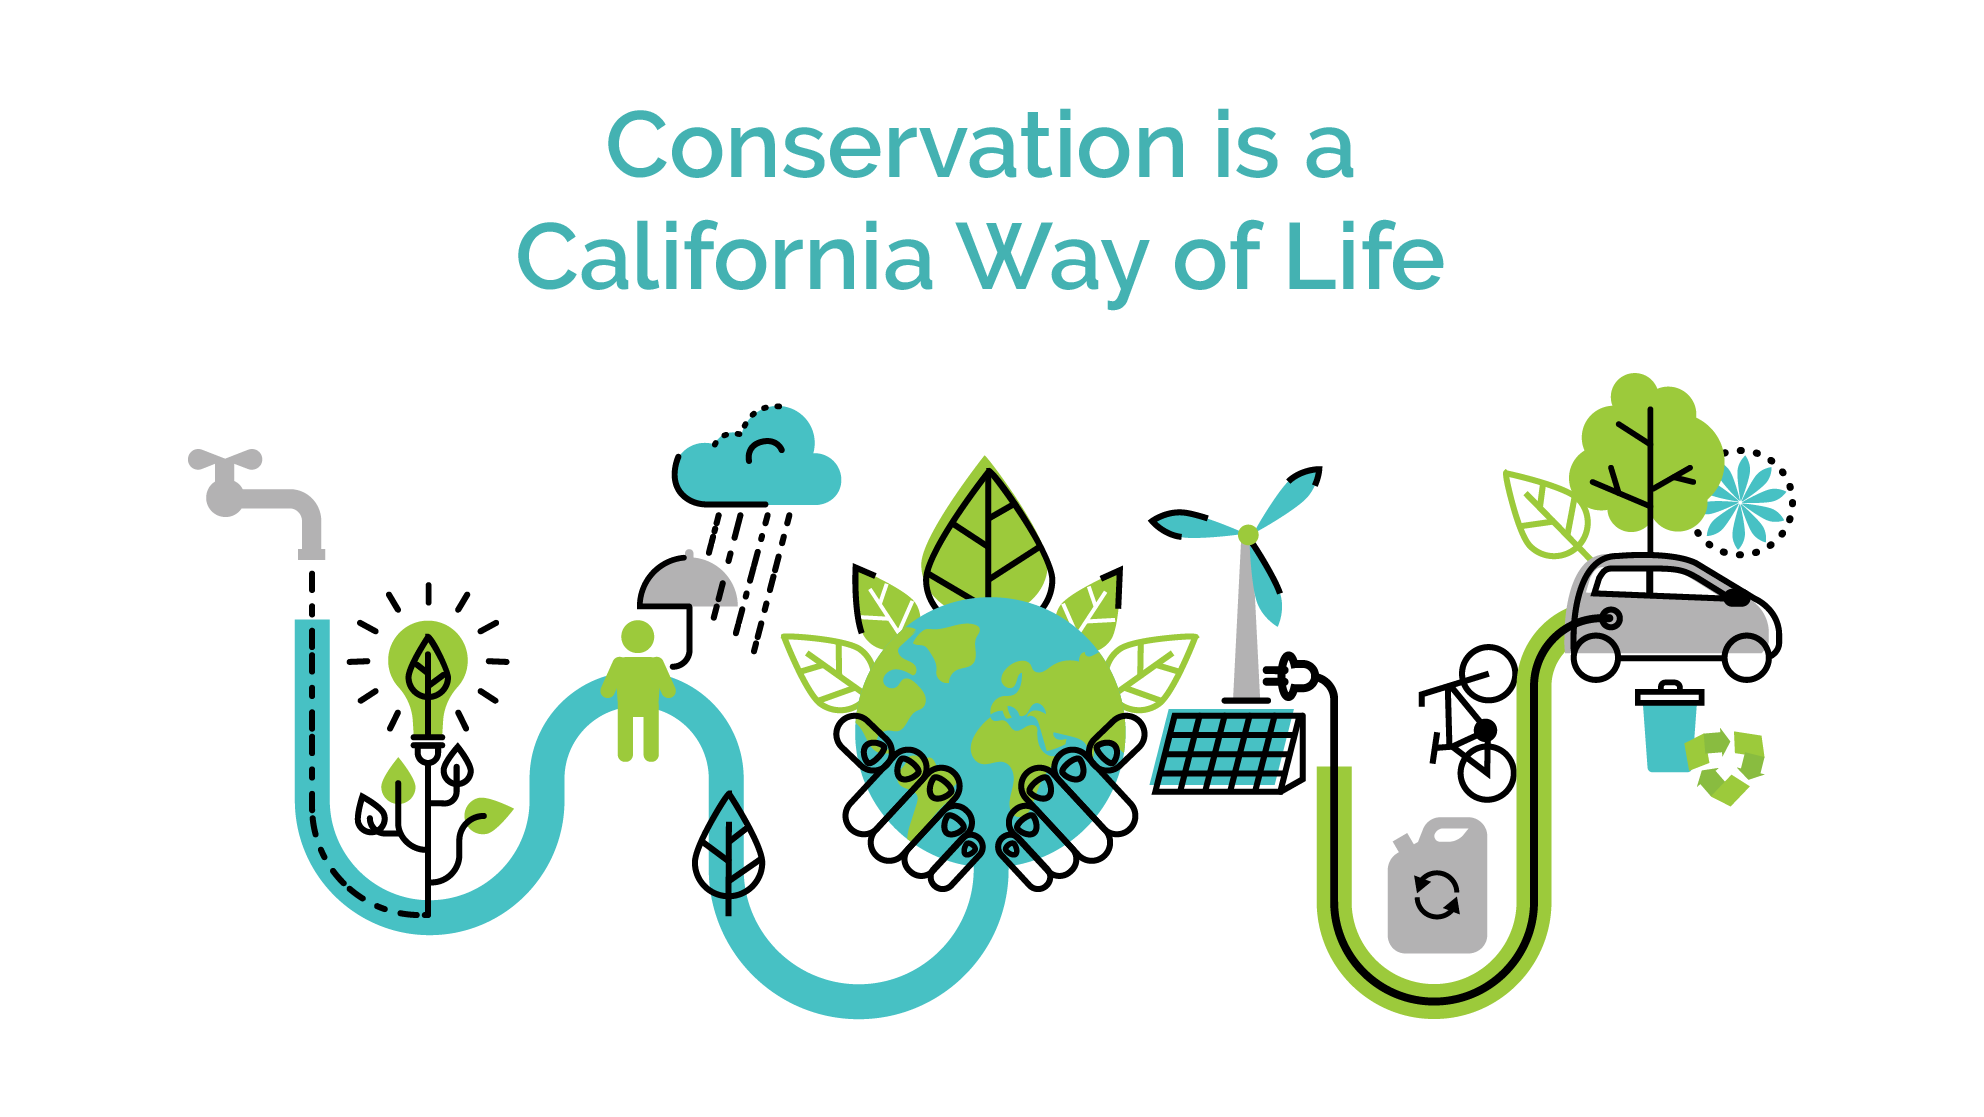 Conservation is a California Way of Life graphic